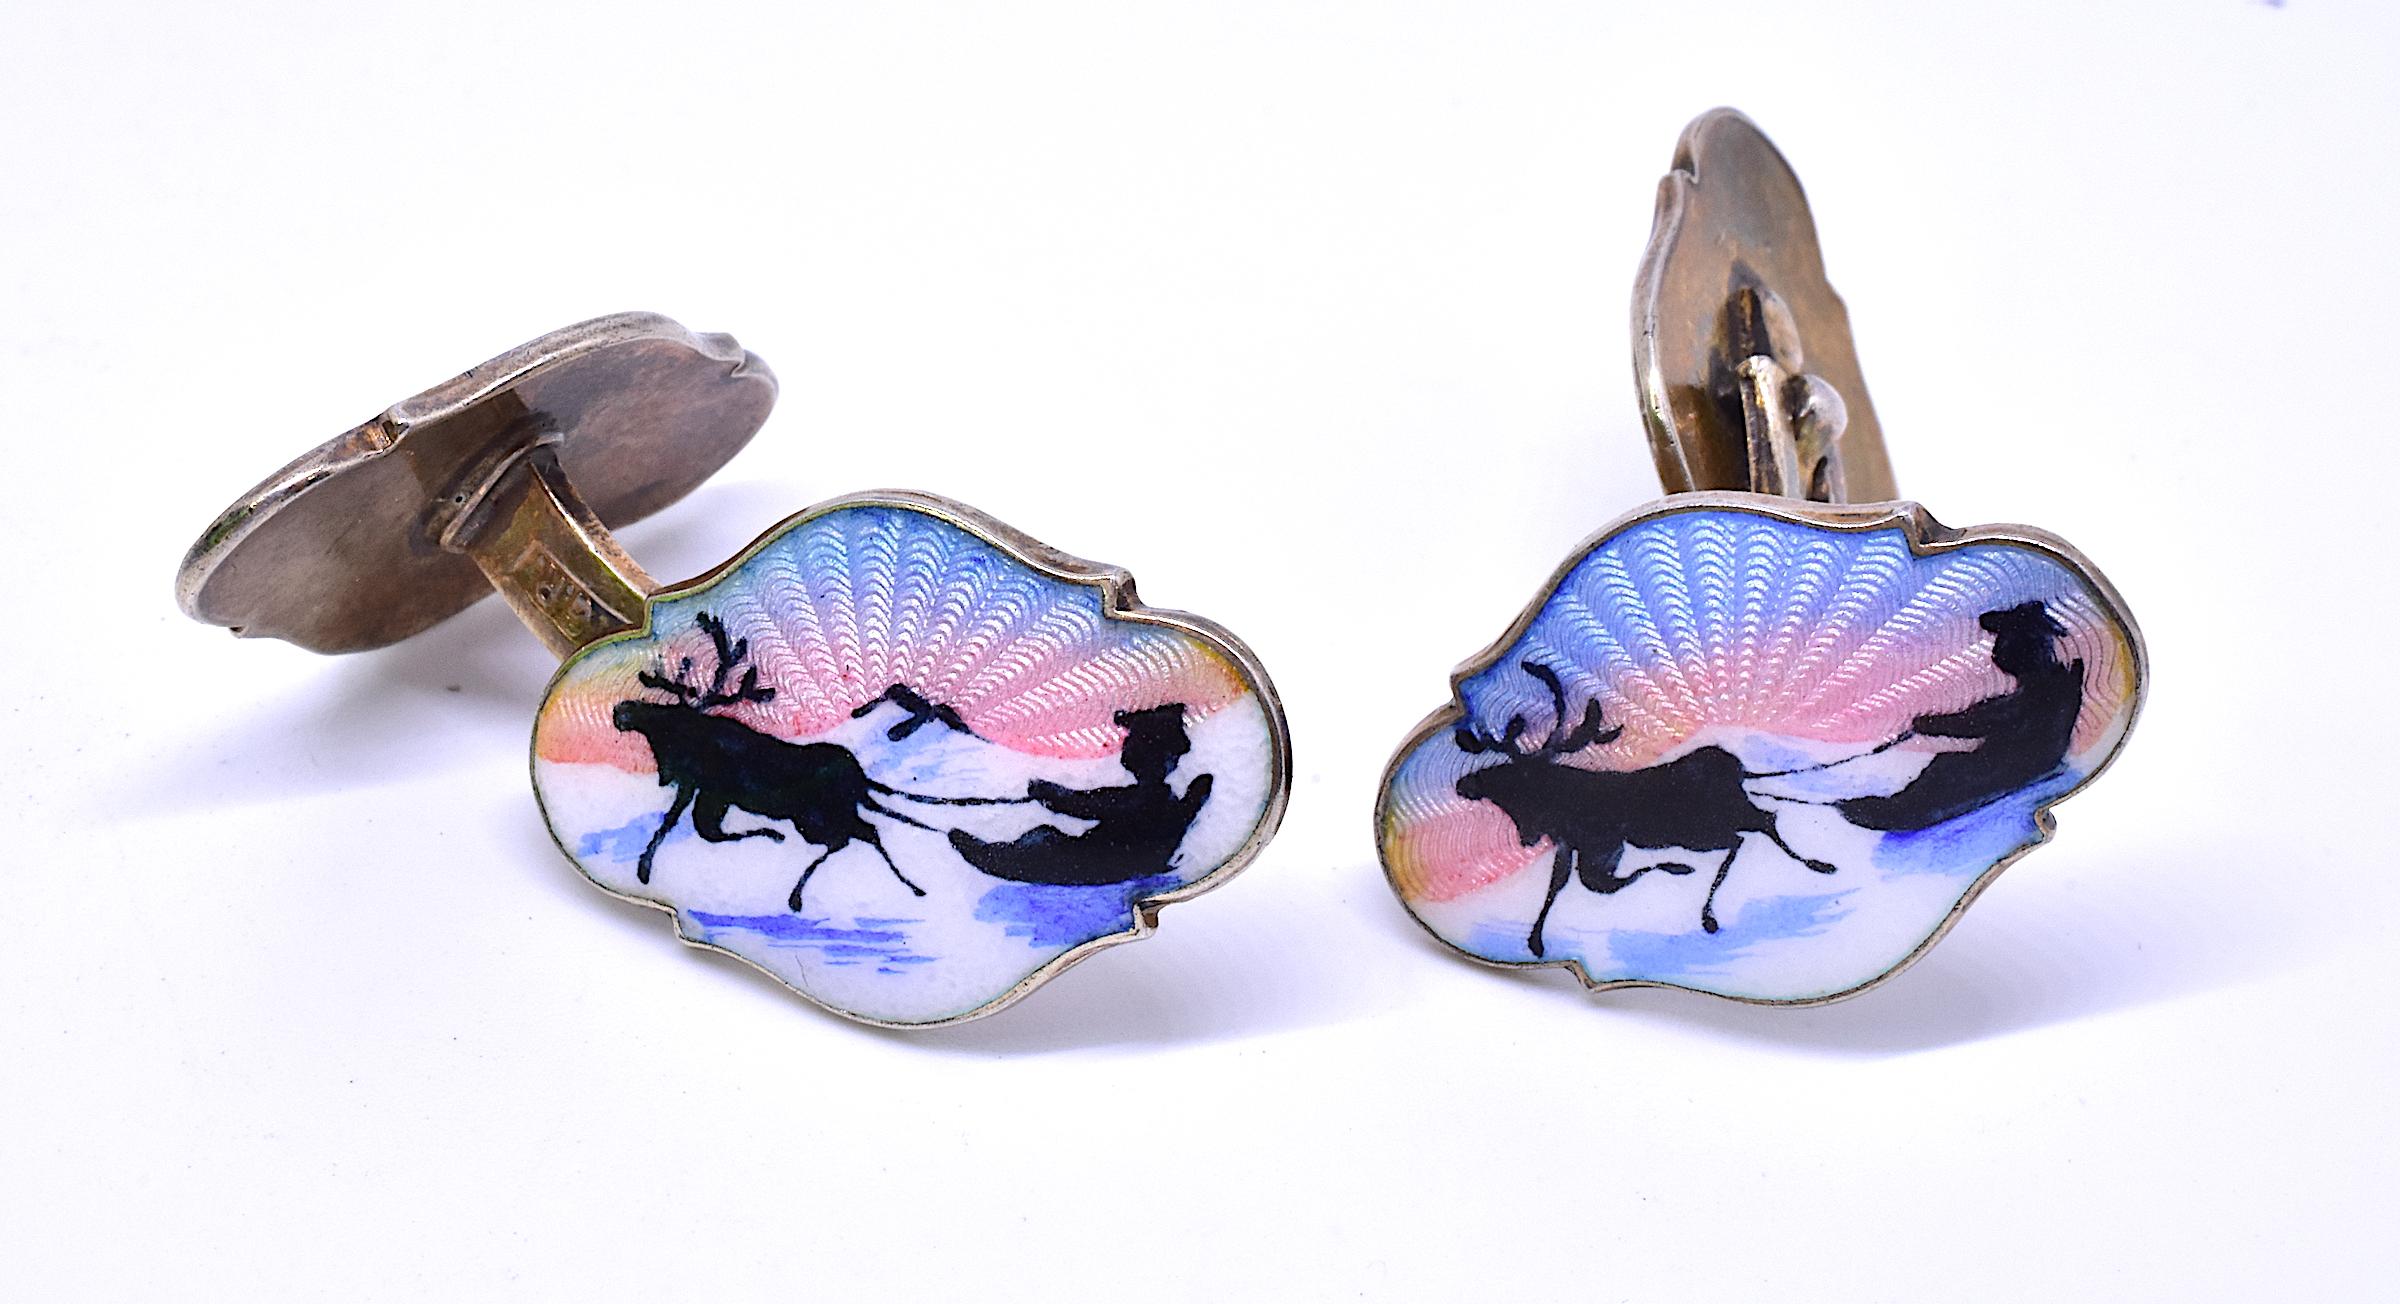 These double sided beautifully colored pastel cufflinks reveal a tree backed landscape and a silhouette of an elk standing in the pasture at sunset. The cufflinks are made of guilloche enamel. The maker is Georg Johannes Ruud, a Norwegian goldsmith